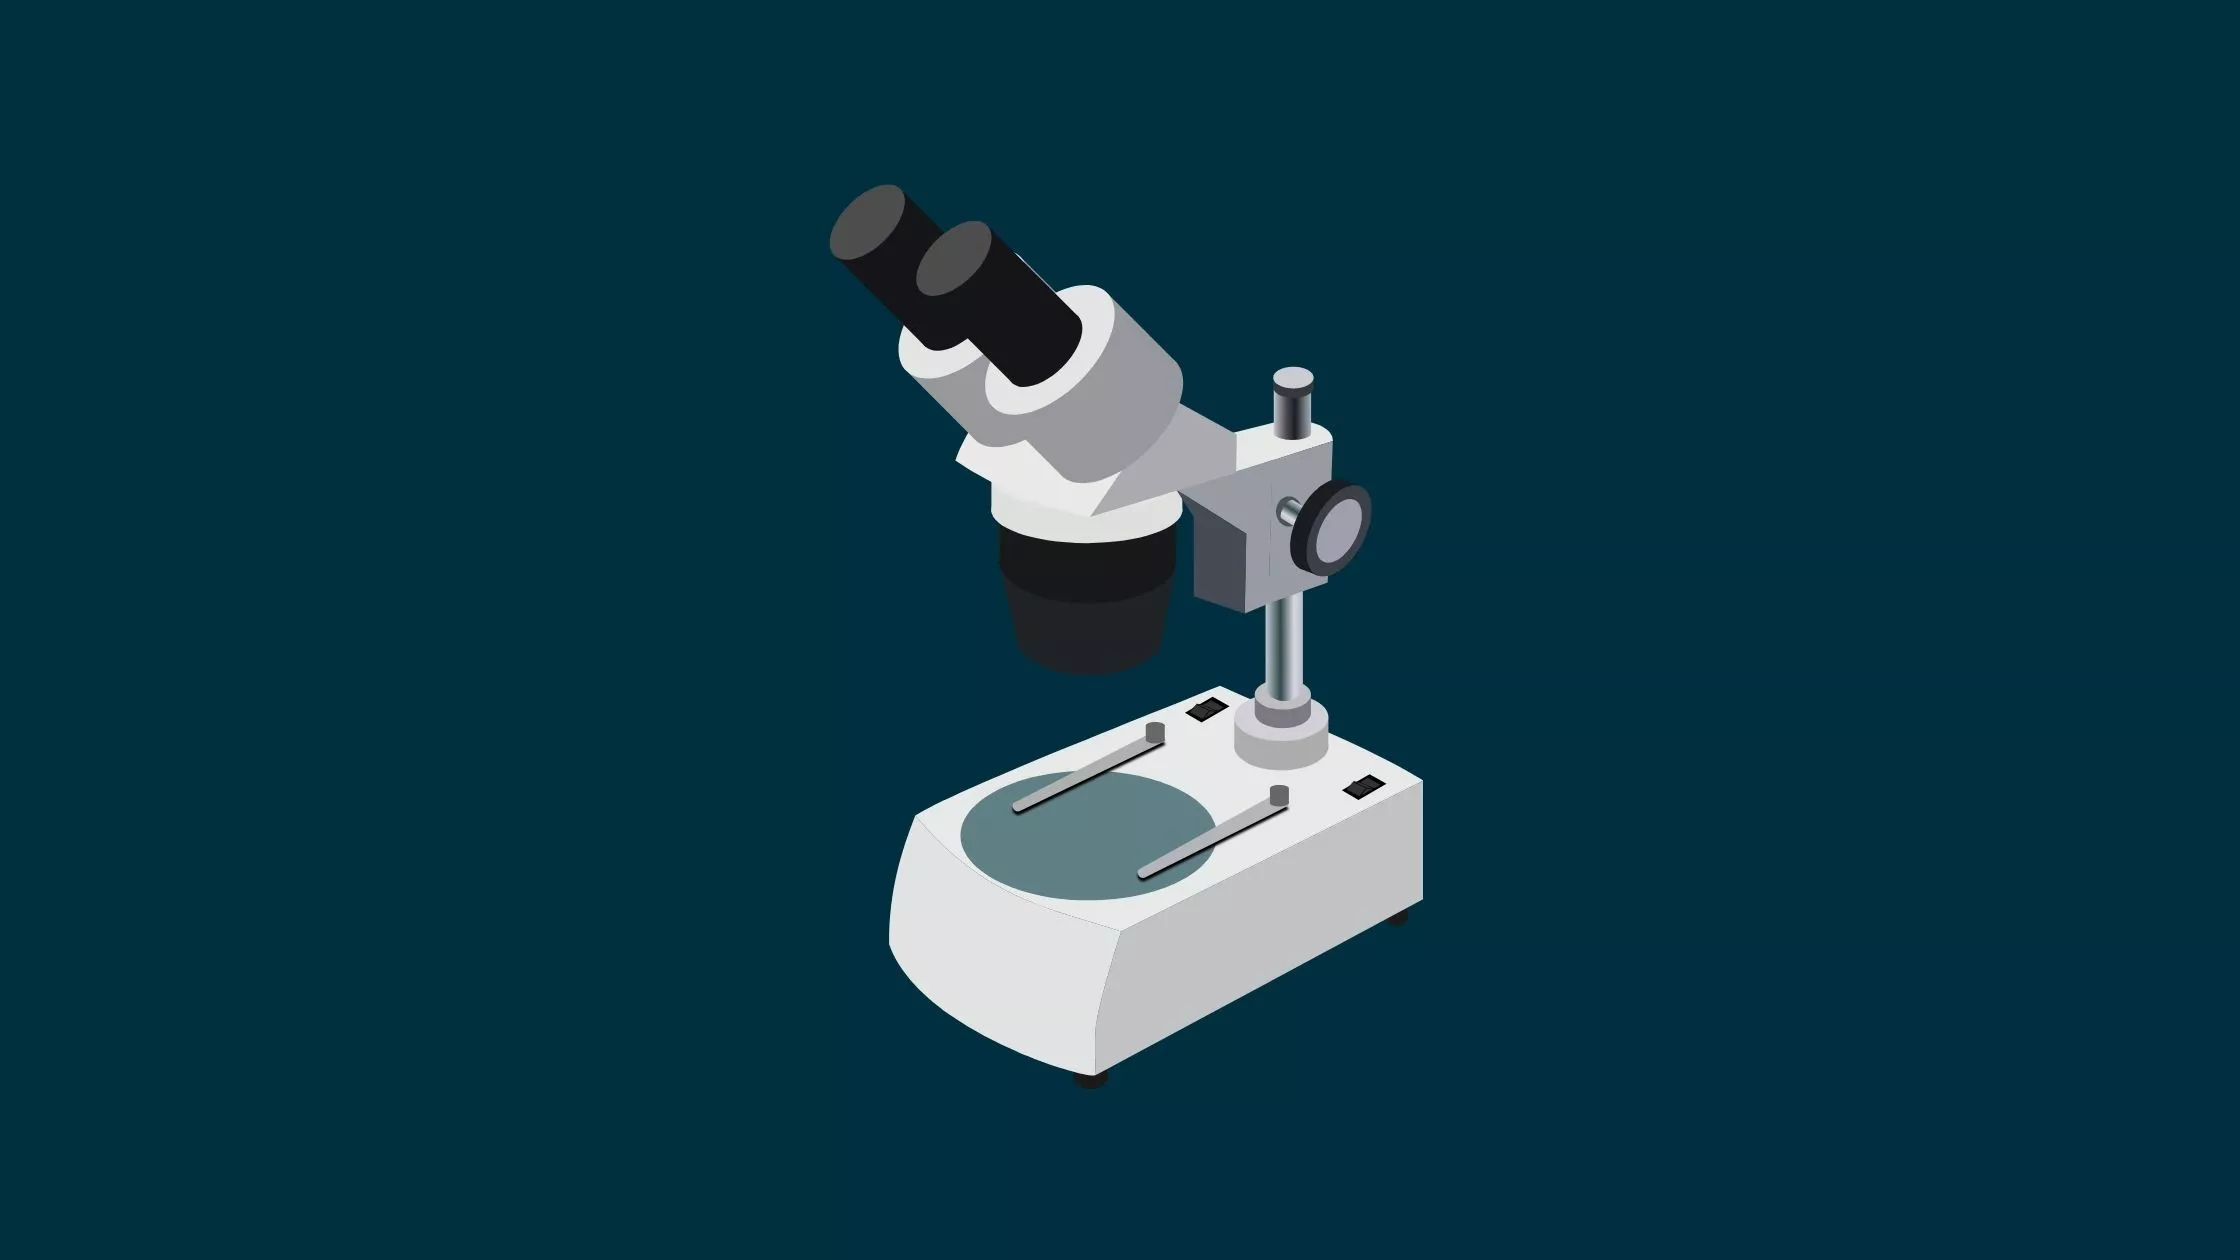 Light Microscope - Labeled Diagram, Definition, Principle, Types, Parts, Applications